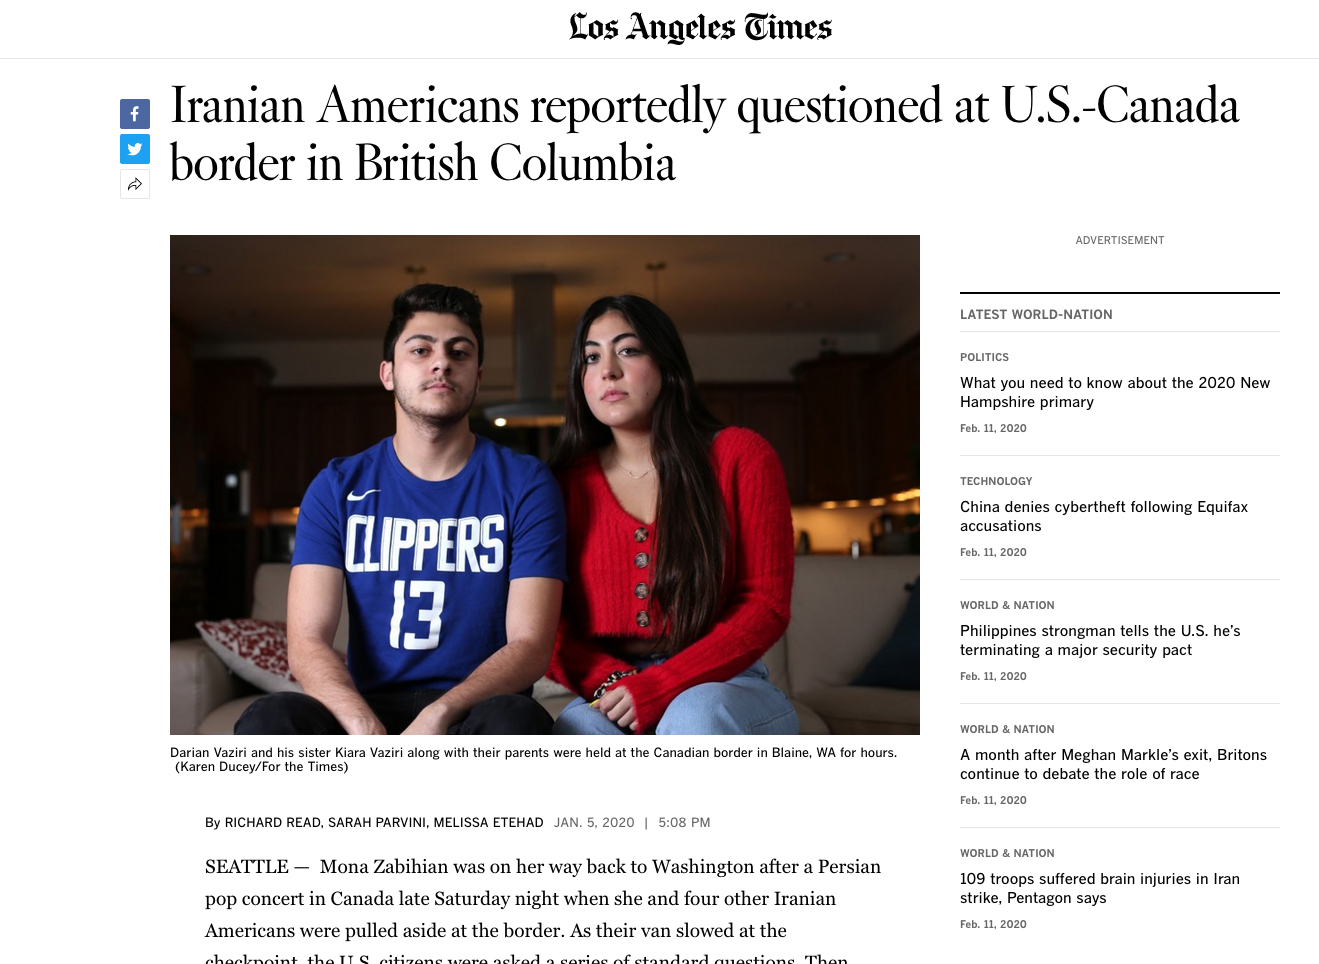 Iranian Americans reportedly questioned at U.S.-Canada border in British Columbia, for the LA Times, January 5, 2020